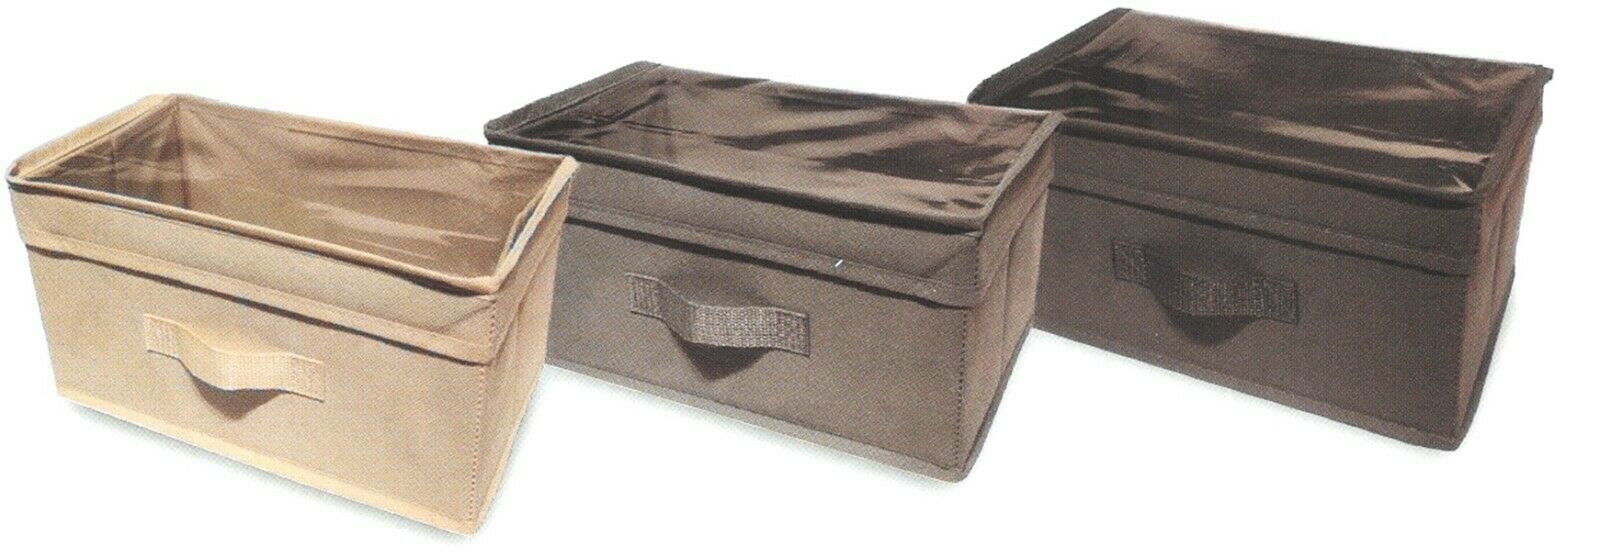 Smart Looking Fabric Medium Storage Box With Lid For shoes Clothing Underwear